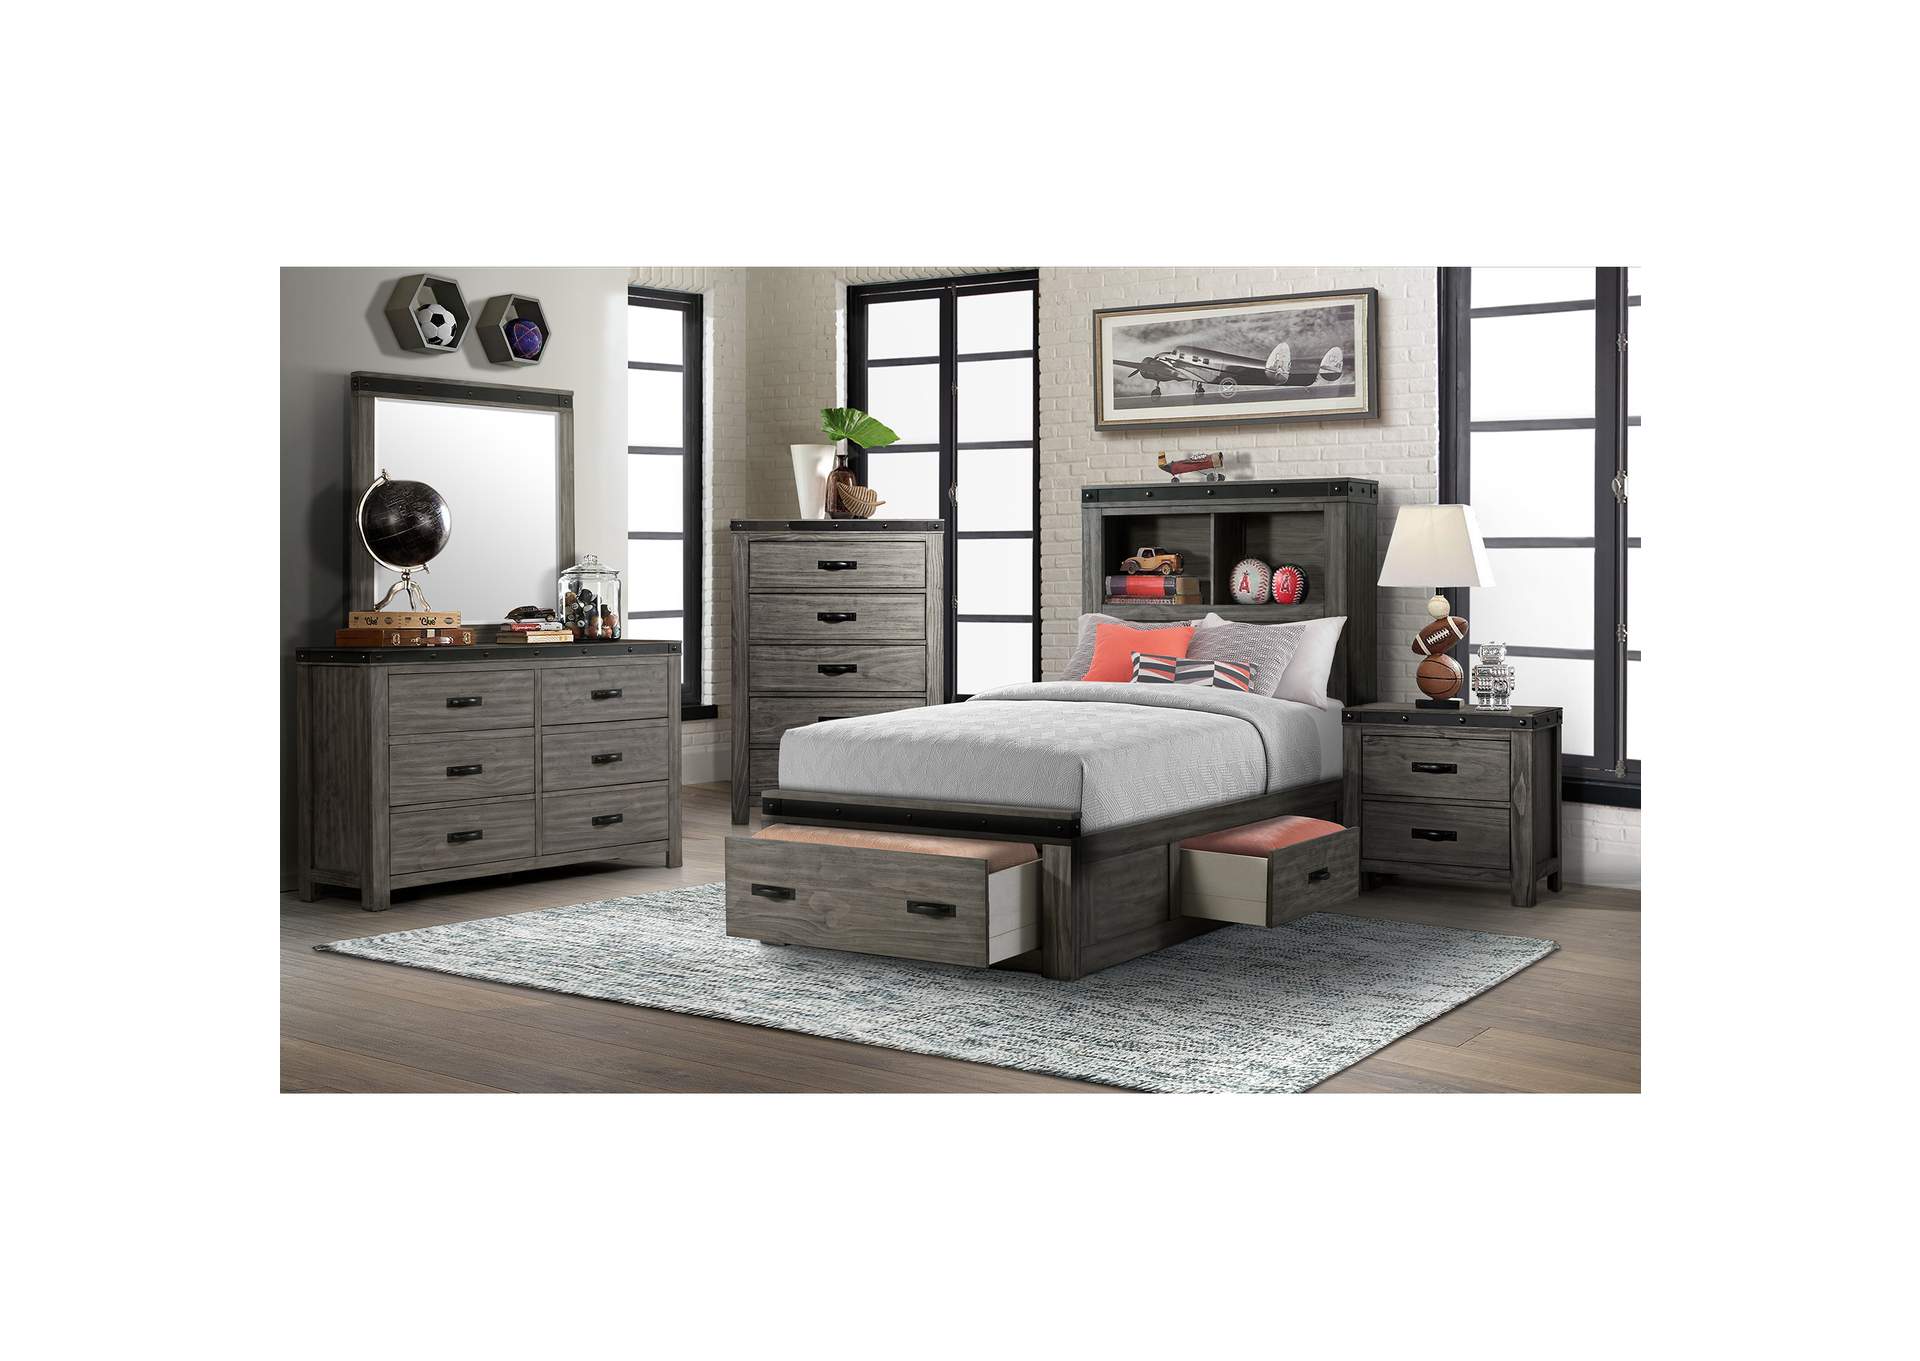 Wade Youth Twin Platform Storage Bed,Elements